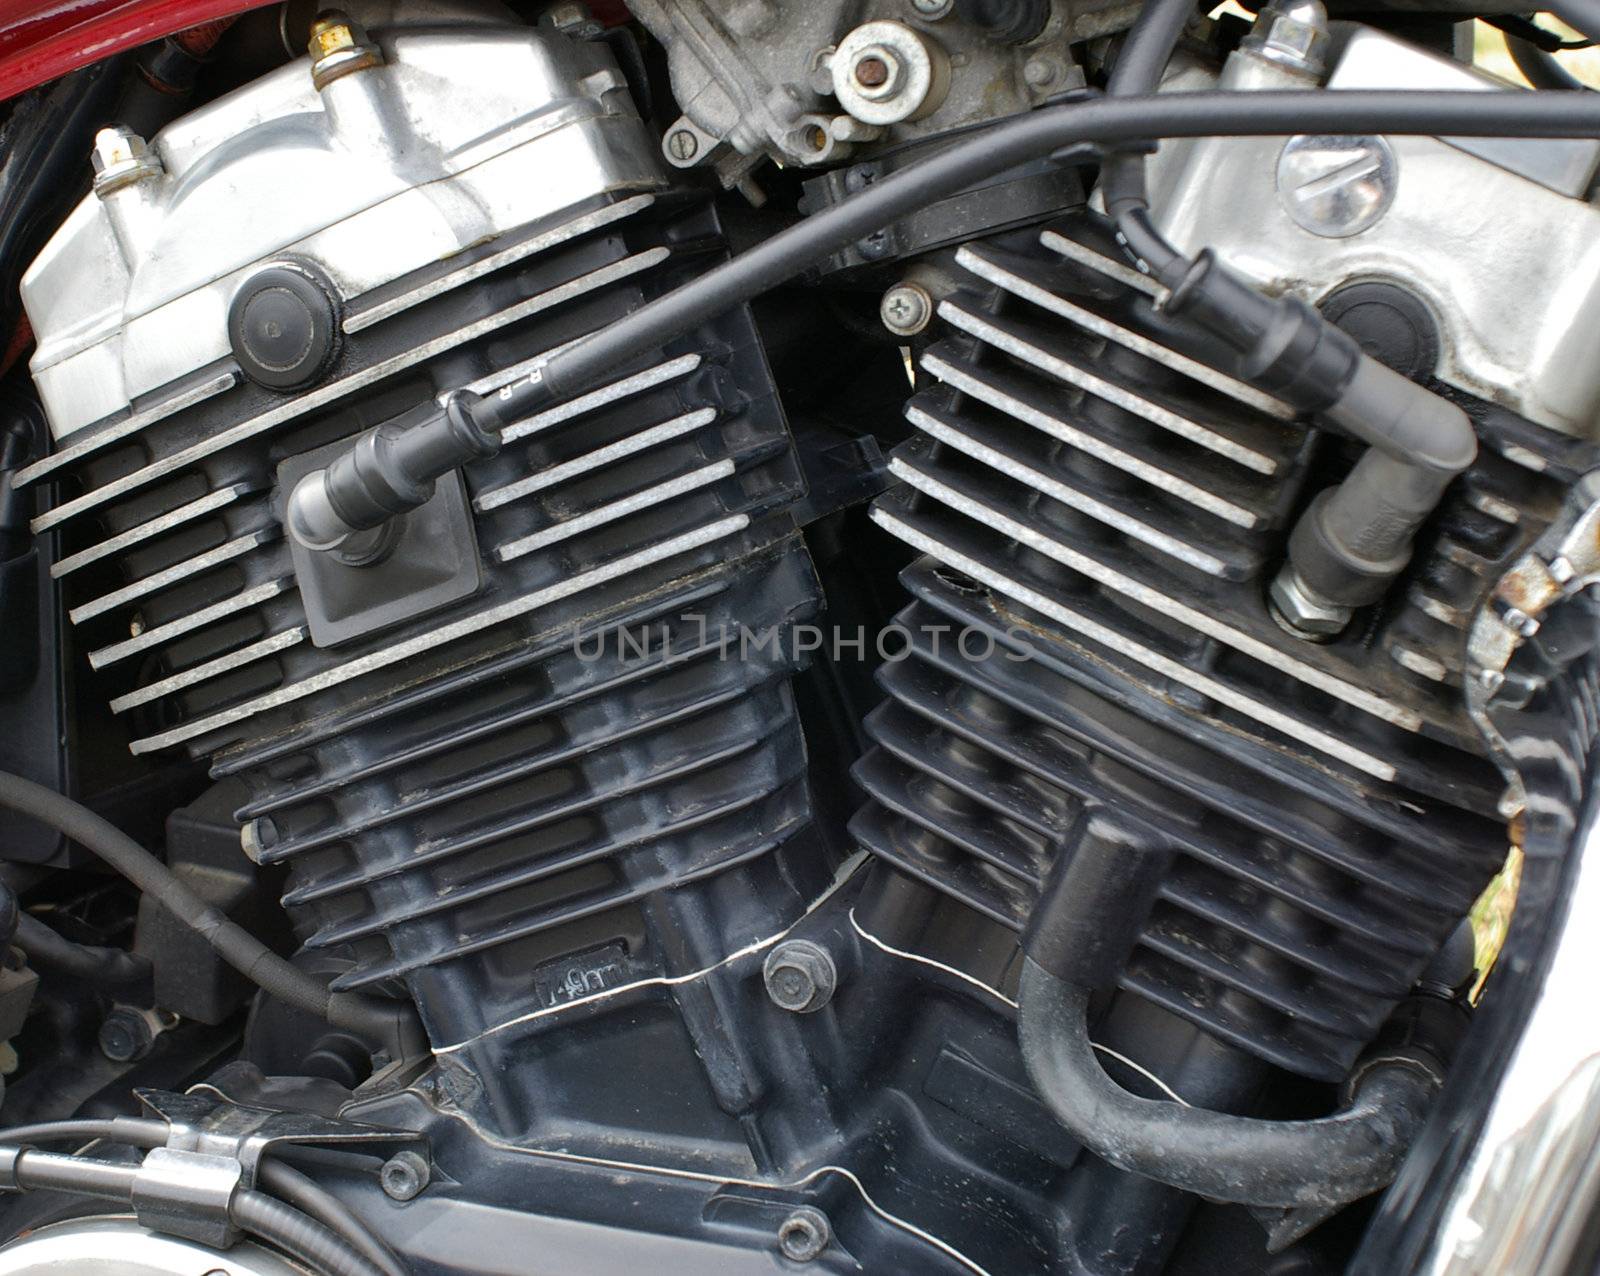 A closeup of a motorcycle engine showing cylinder heads and plug wires.